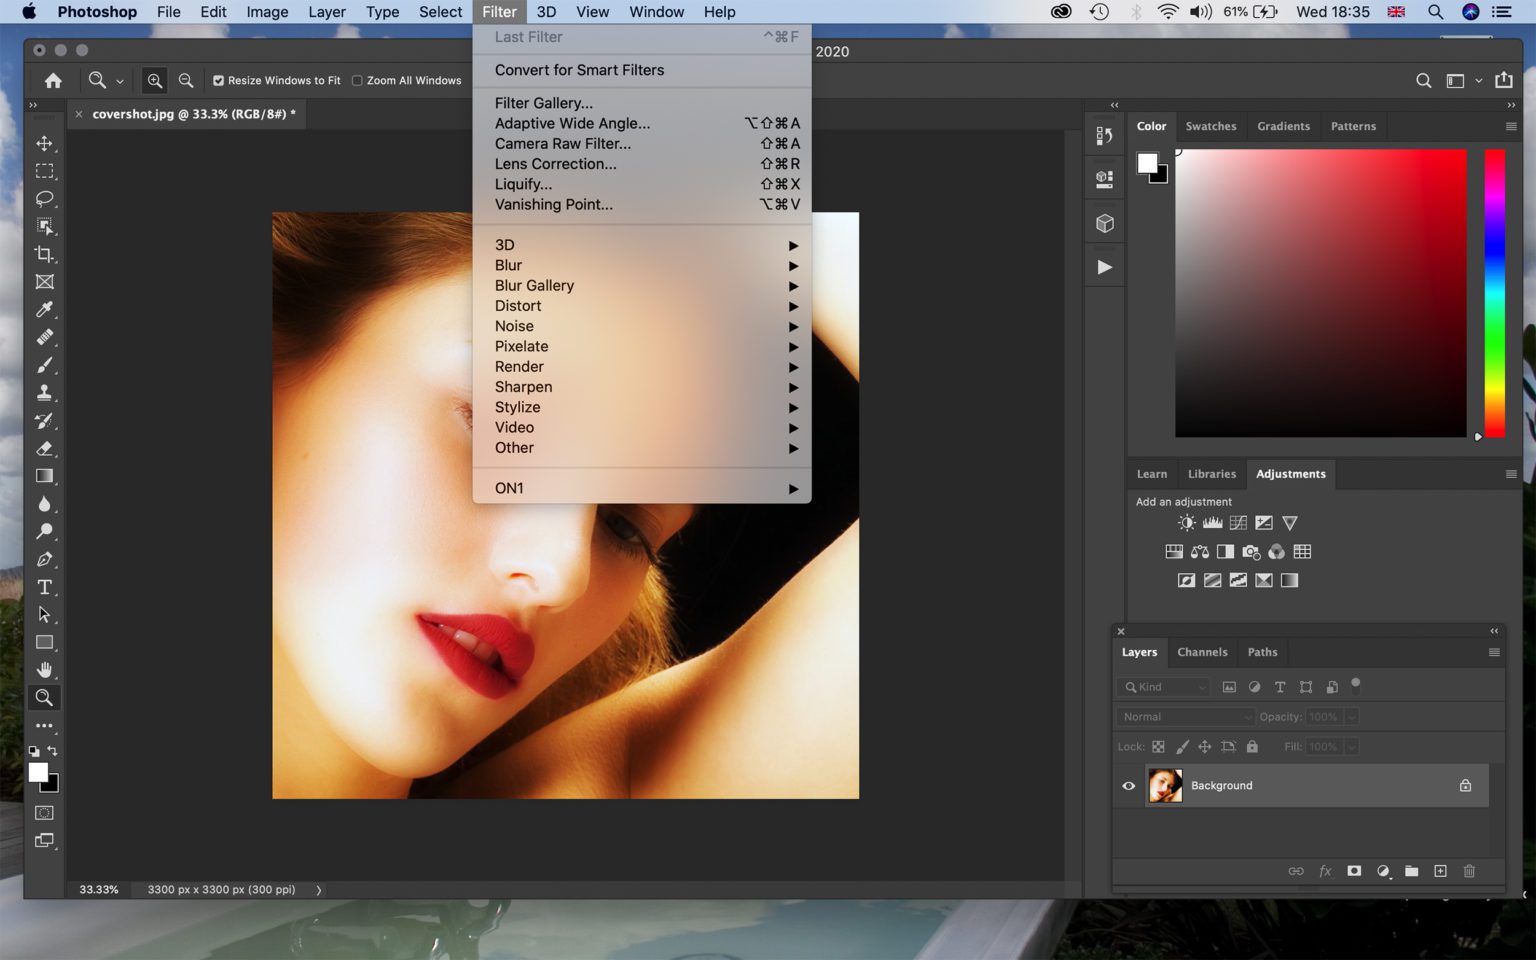 adobe photoshop 7.0 filters free download full version